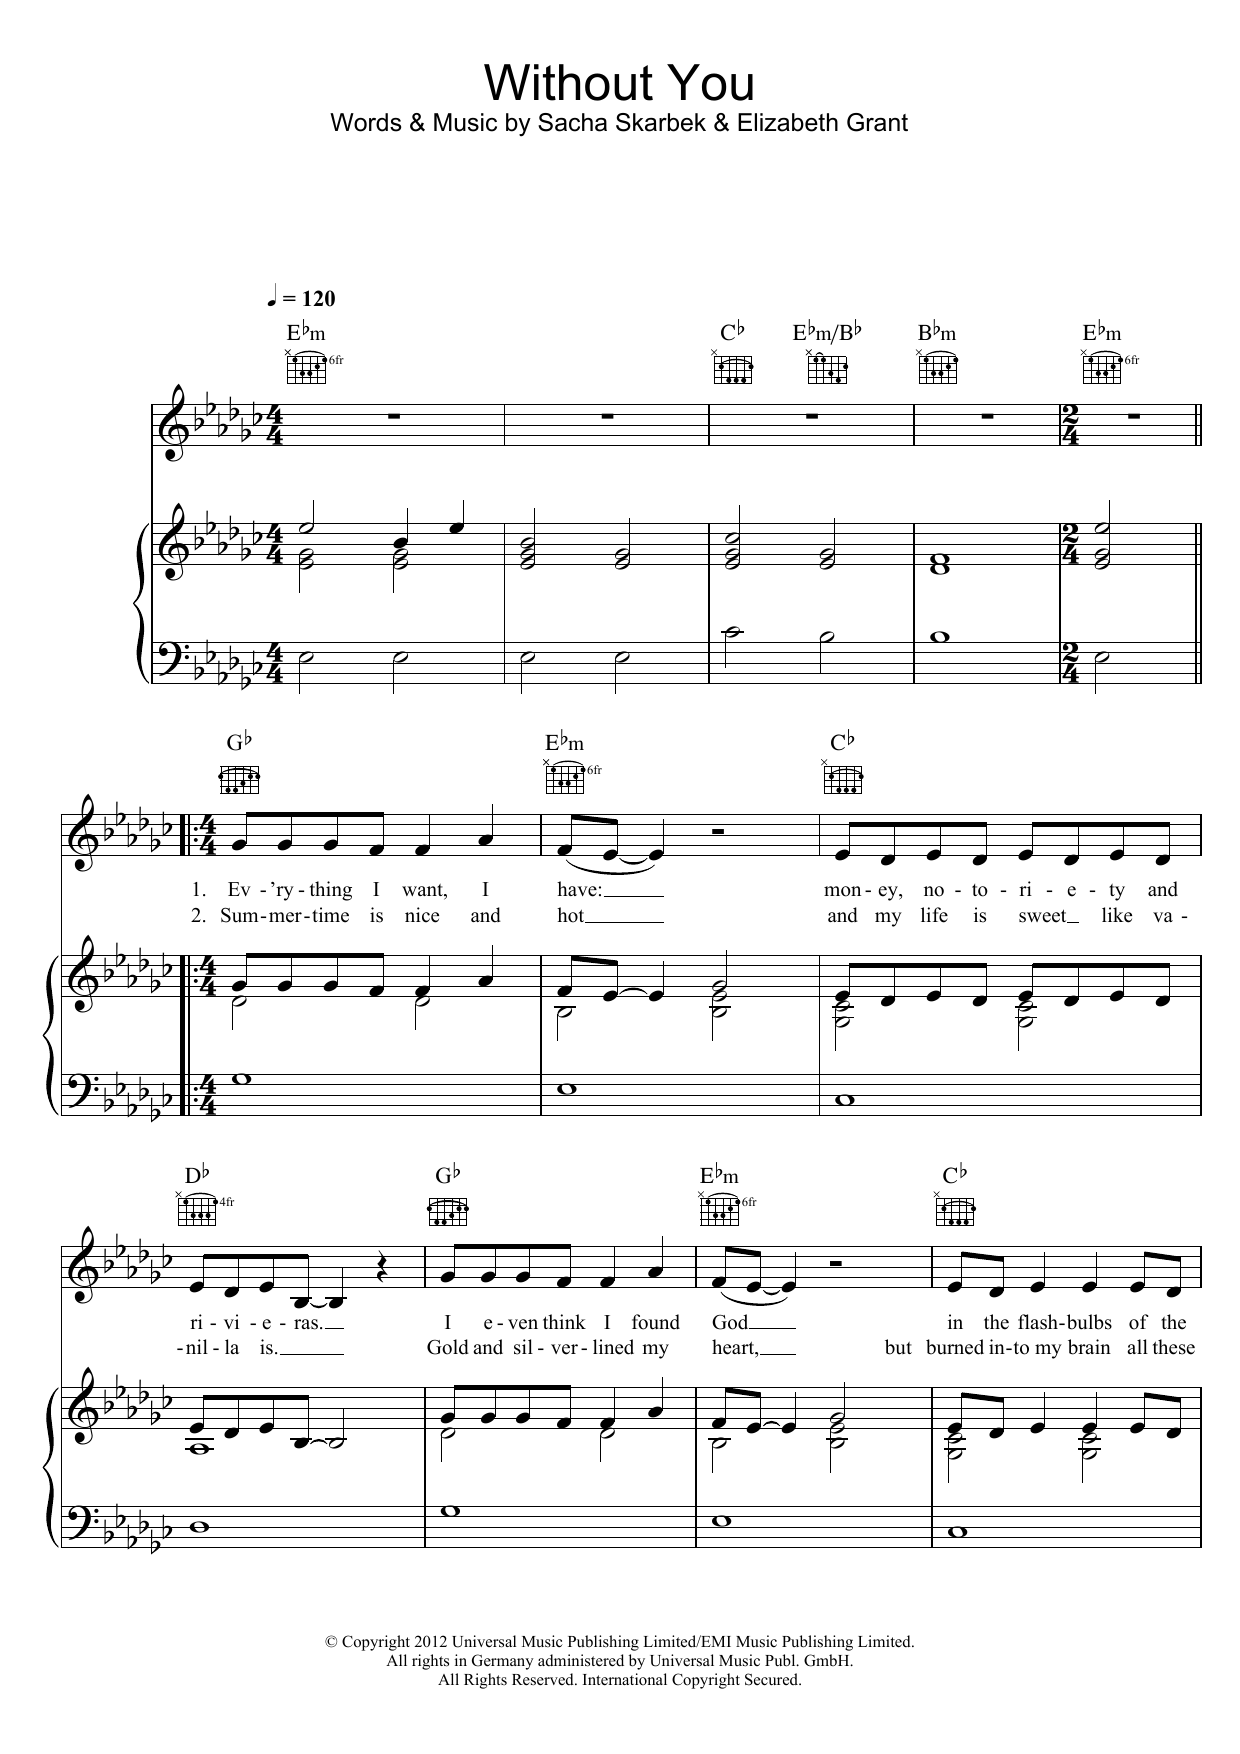 Download Lana Del Rey Without You Sheet Music